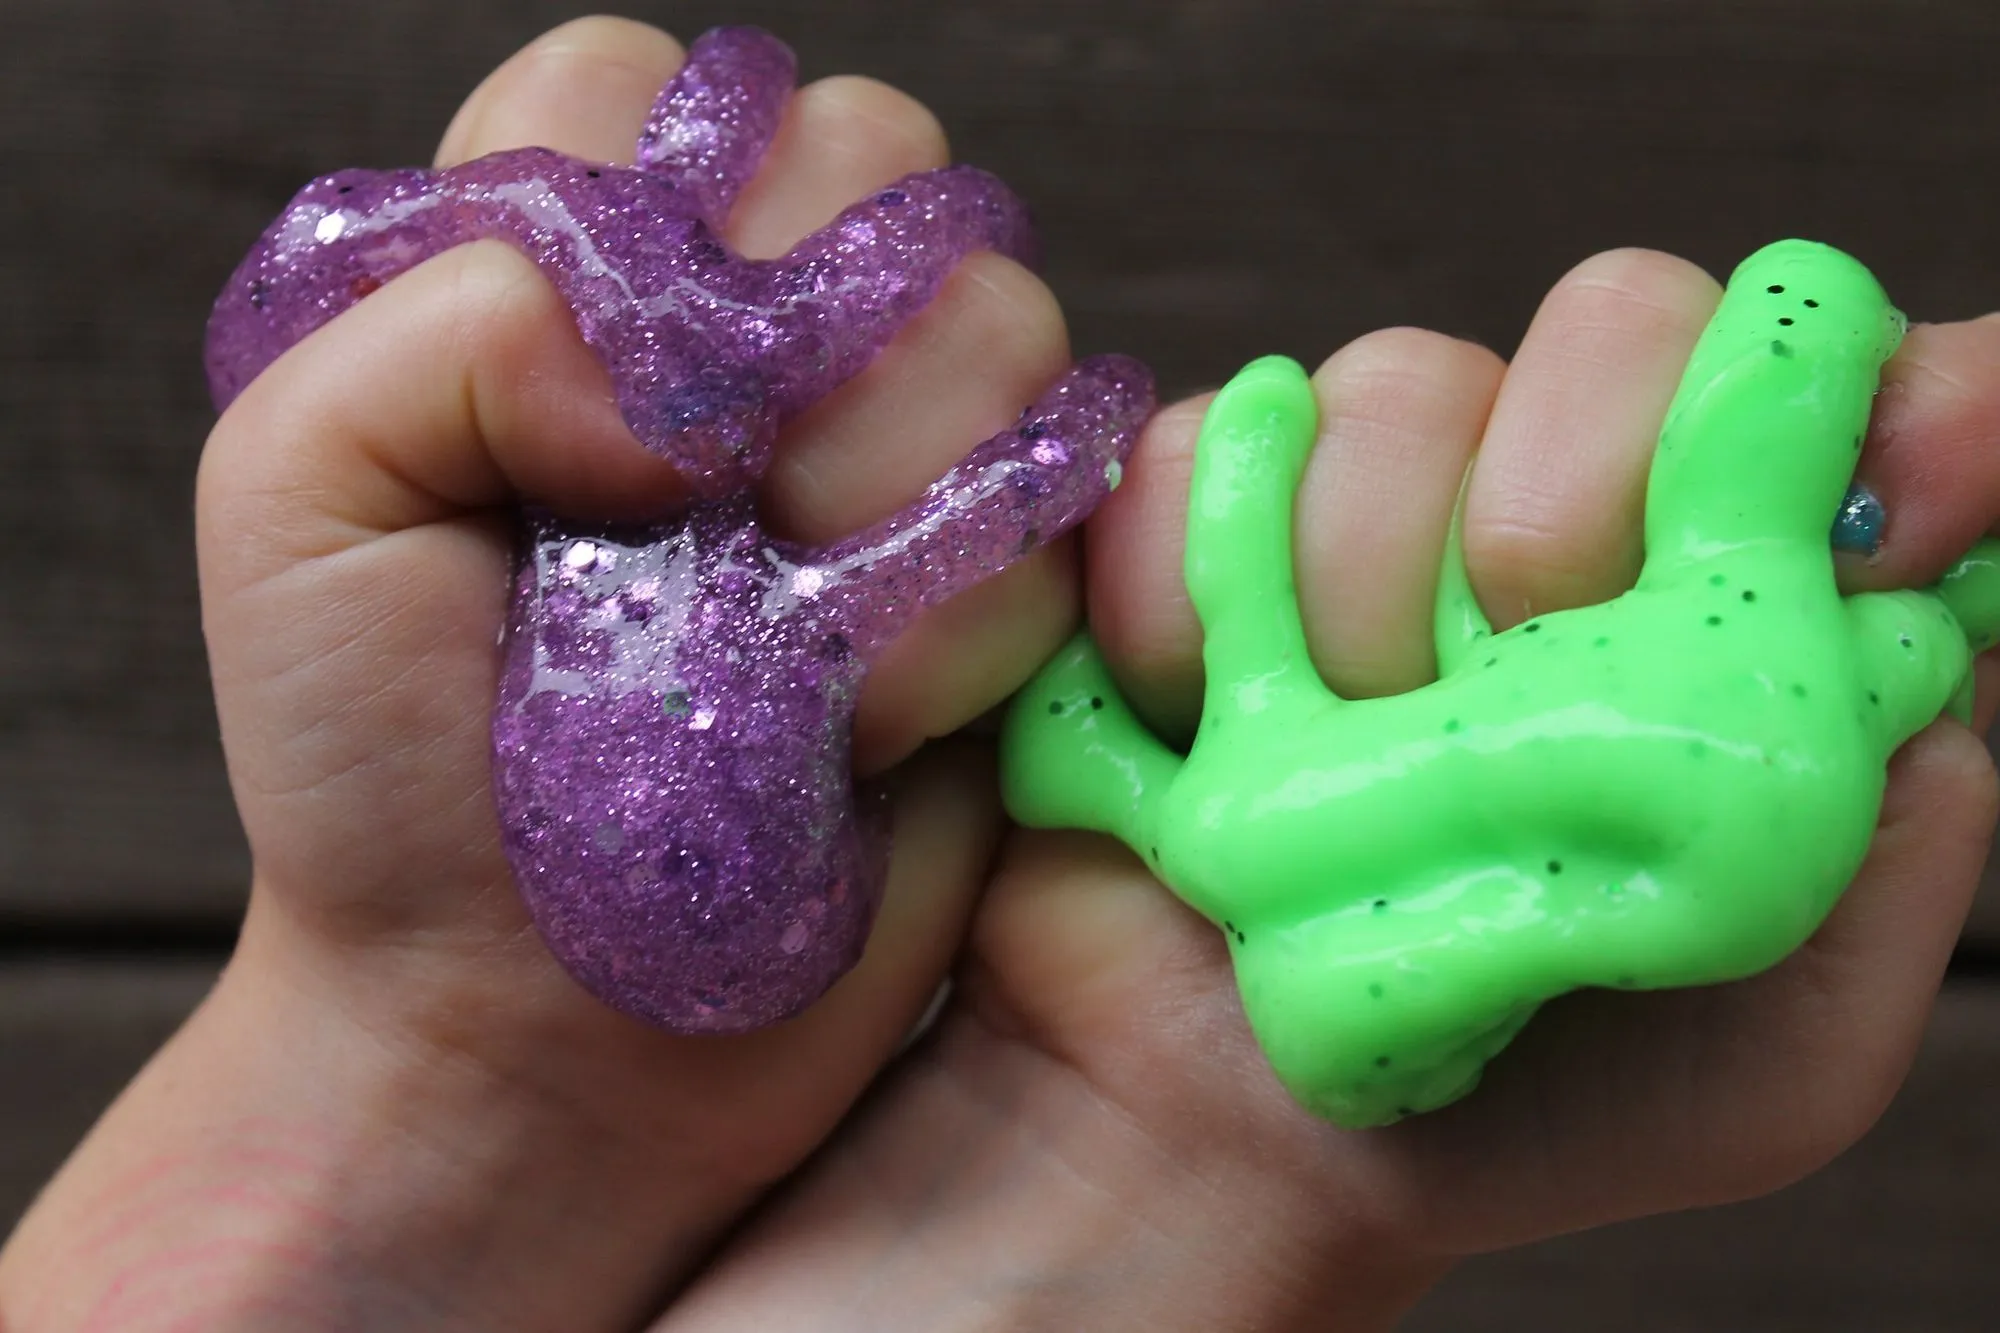 child squeezing glittery purple and neon green slime in each hand